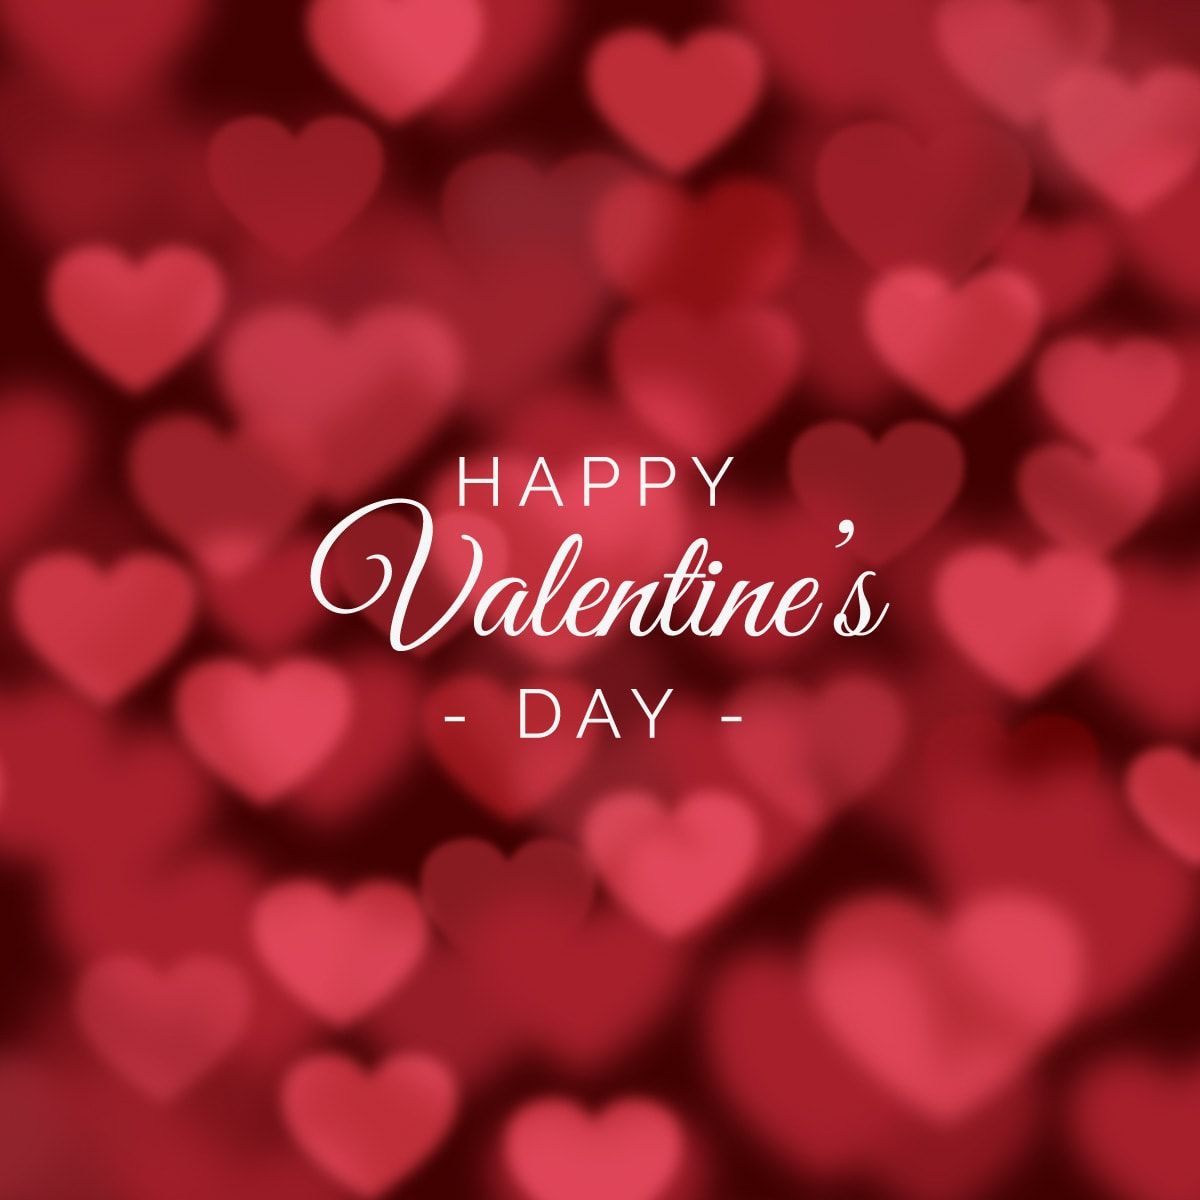 Happy Valentines Day 2022 Images, *HD* Pictures and Photos